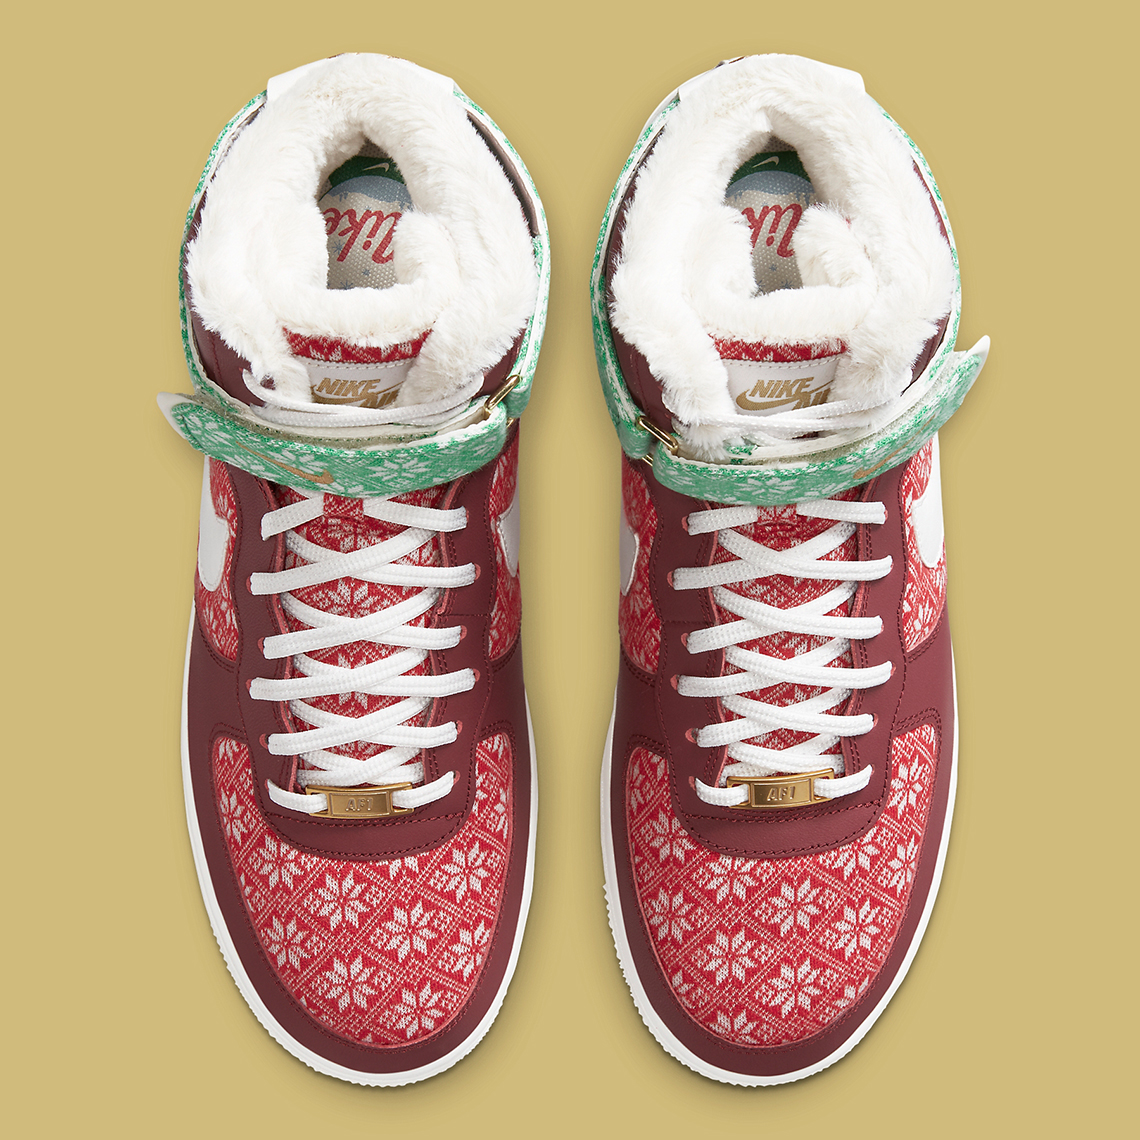 Nike's Feeling Festive With The Air Force 1 High Utility 2.0 Christmas -  Sneaker News